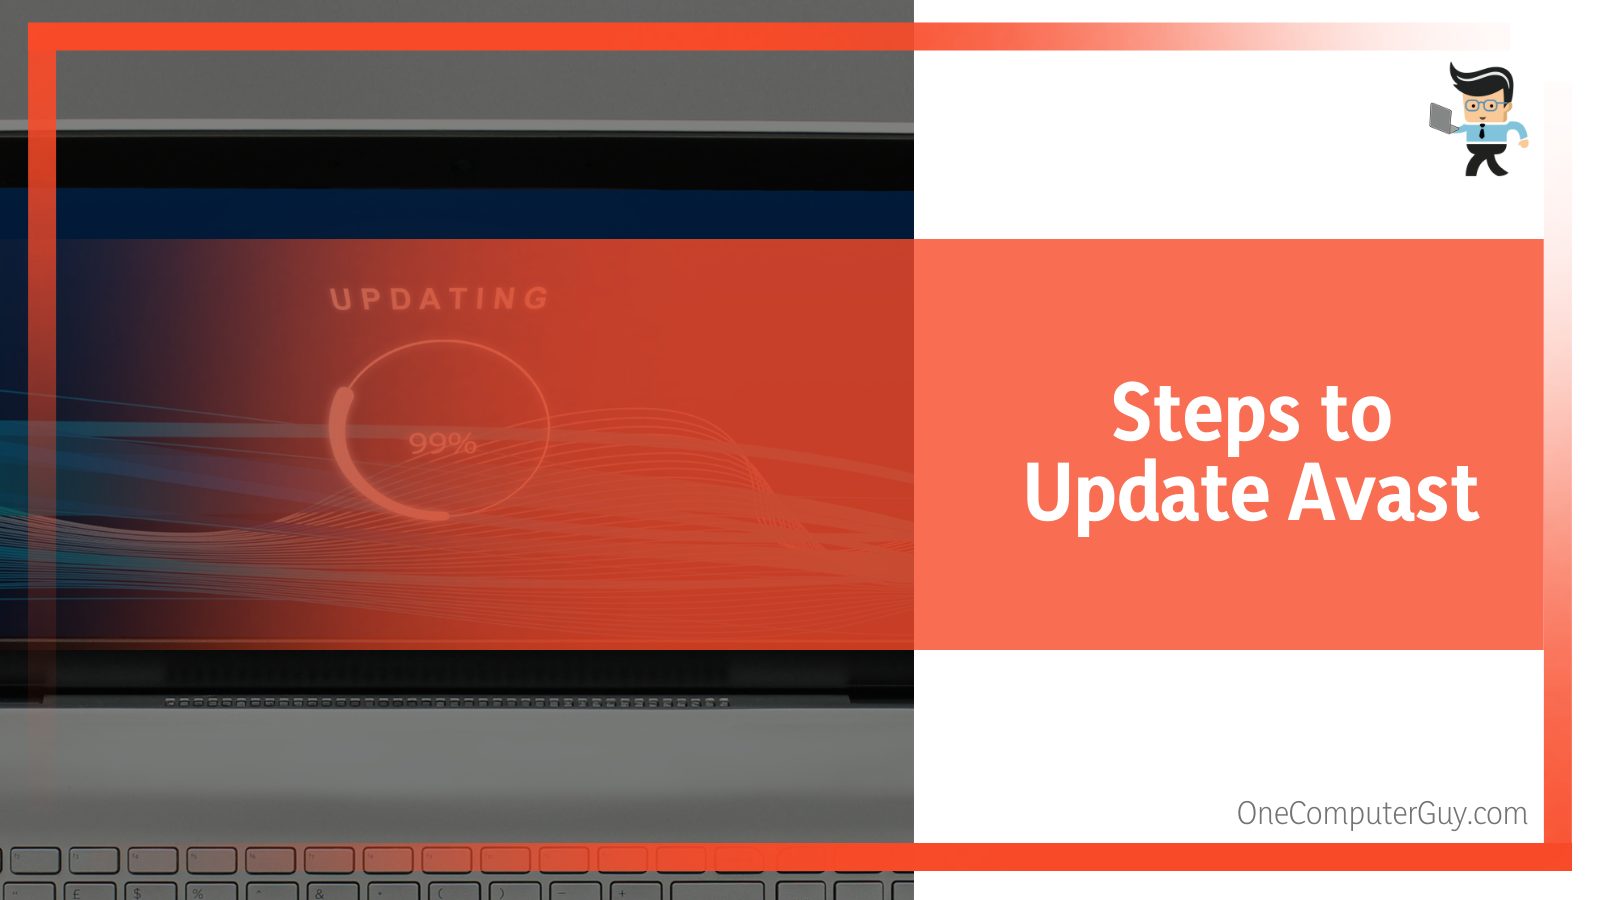 Steps to Update Avast